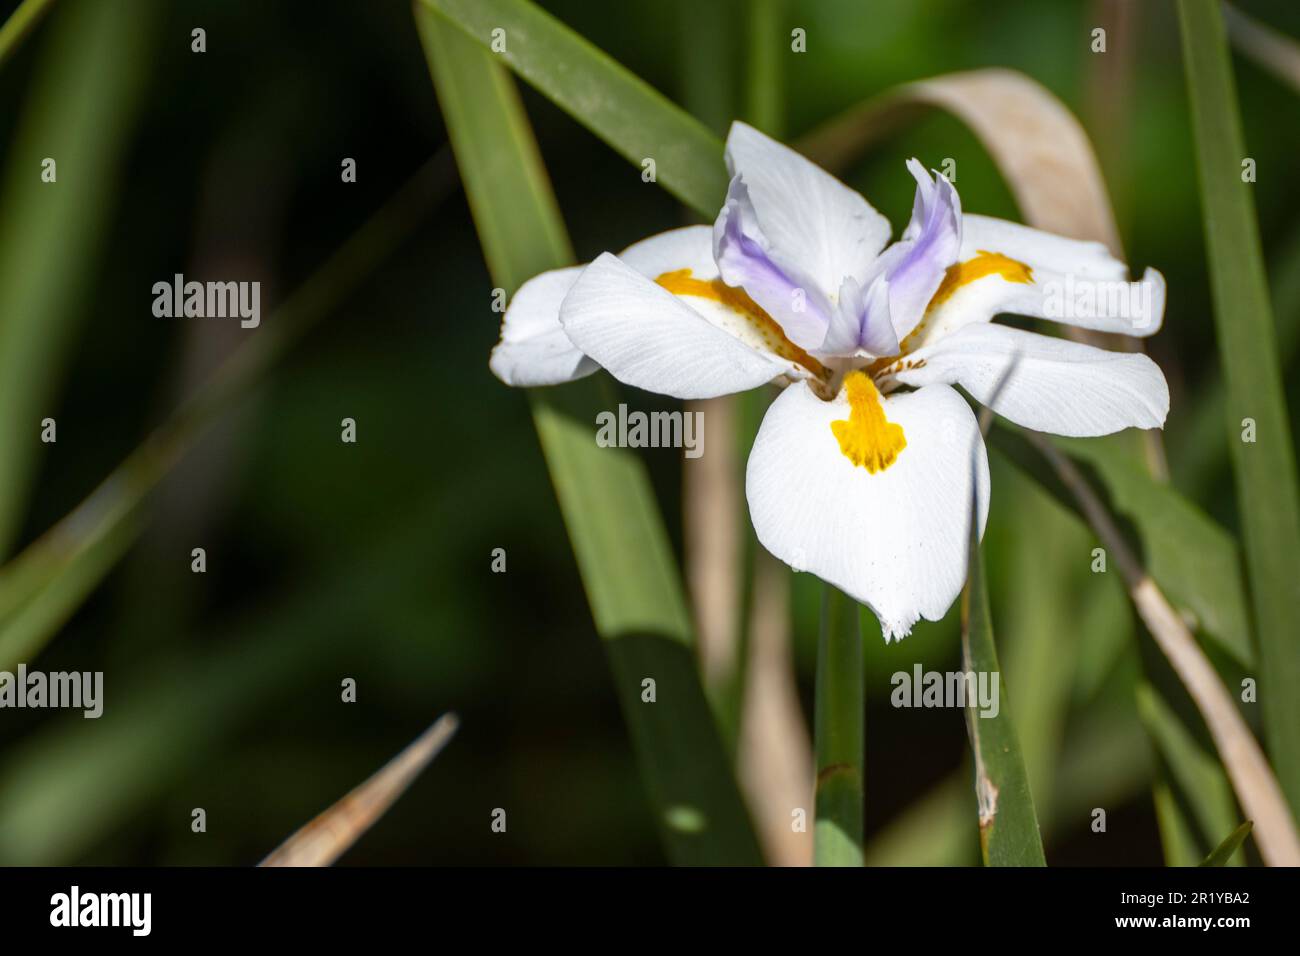 Dietes grandiflora (common names are large wild iris, fairy iris) native South Africa common in gardens around the world. Photographed in Israel in Fe Stock Photo